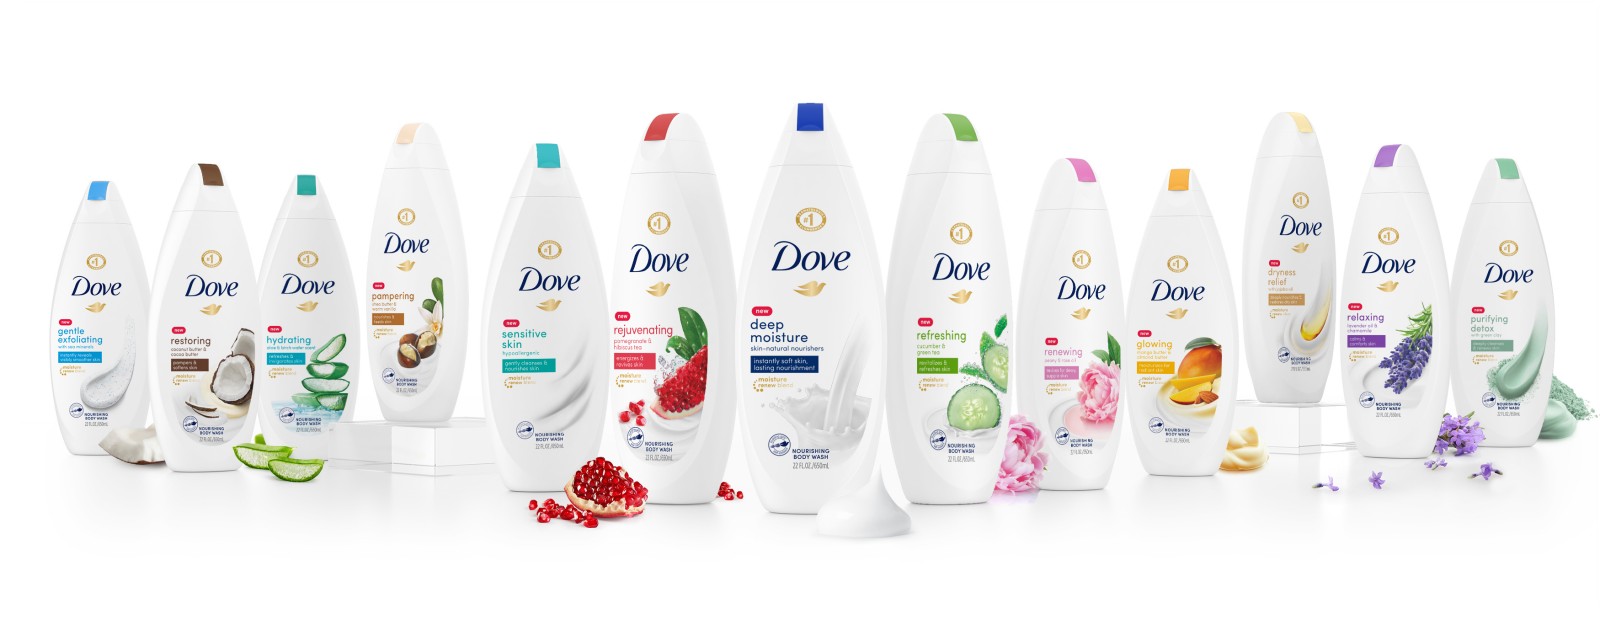 forceMAJEURE-Design-Dove-Body-Wash-Global-Relaunch4.jpg